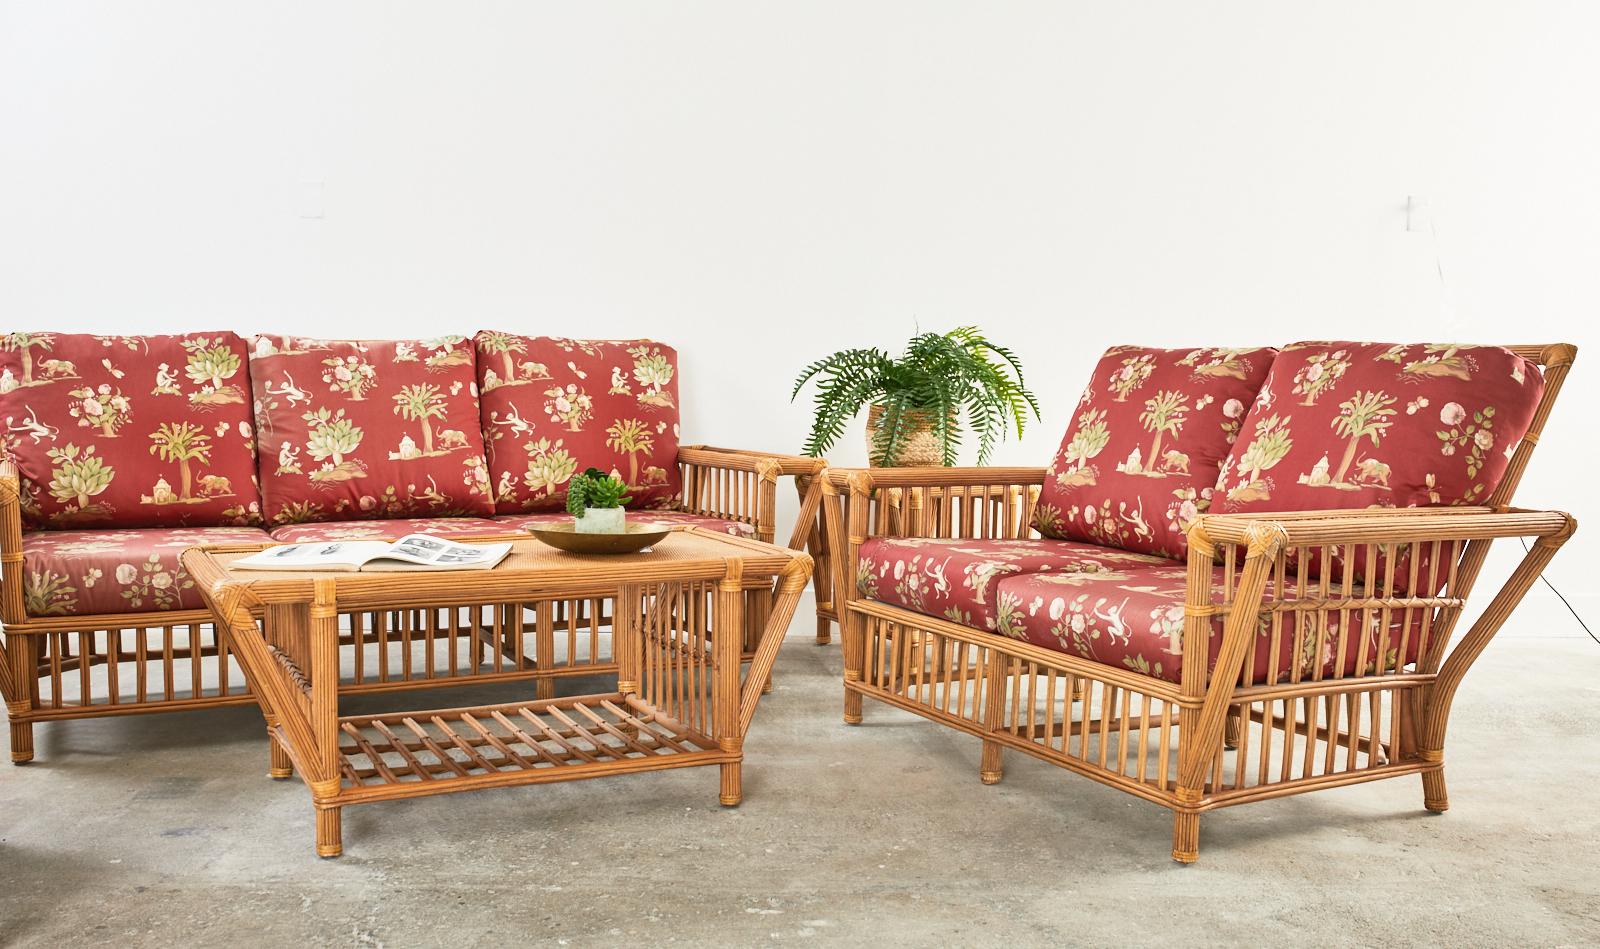 Extraordinary five piece living room or patio and garden suite crafted from rattan in the manner and style of Vivai del Sud. The set consists of a large sofa measuring 85